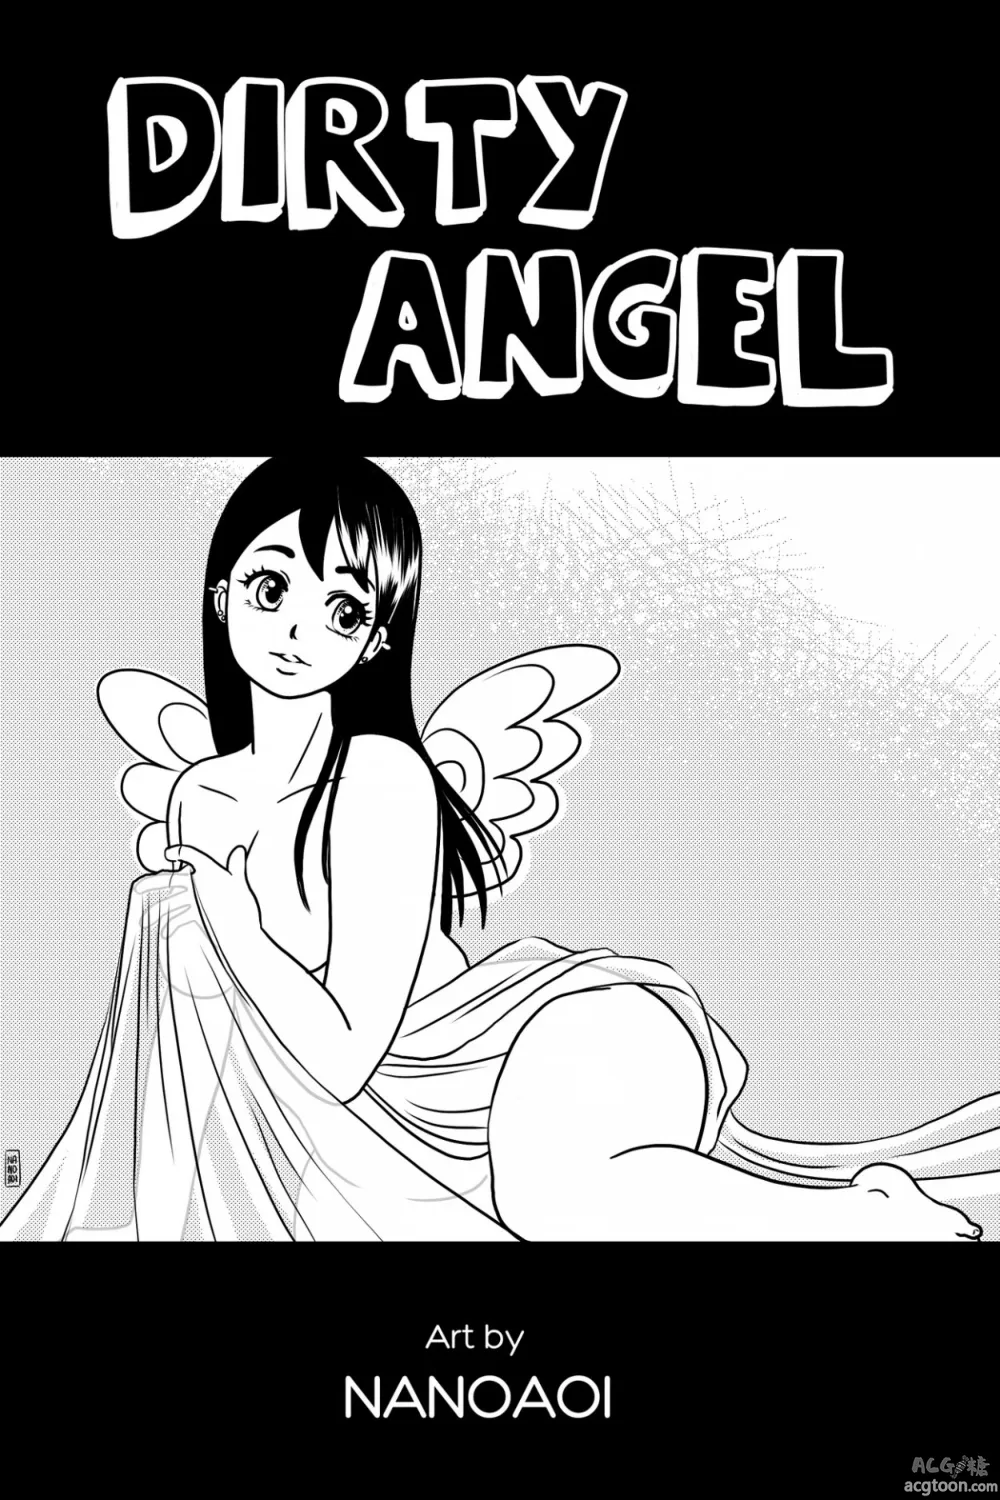 Dirty Angel - Page 1